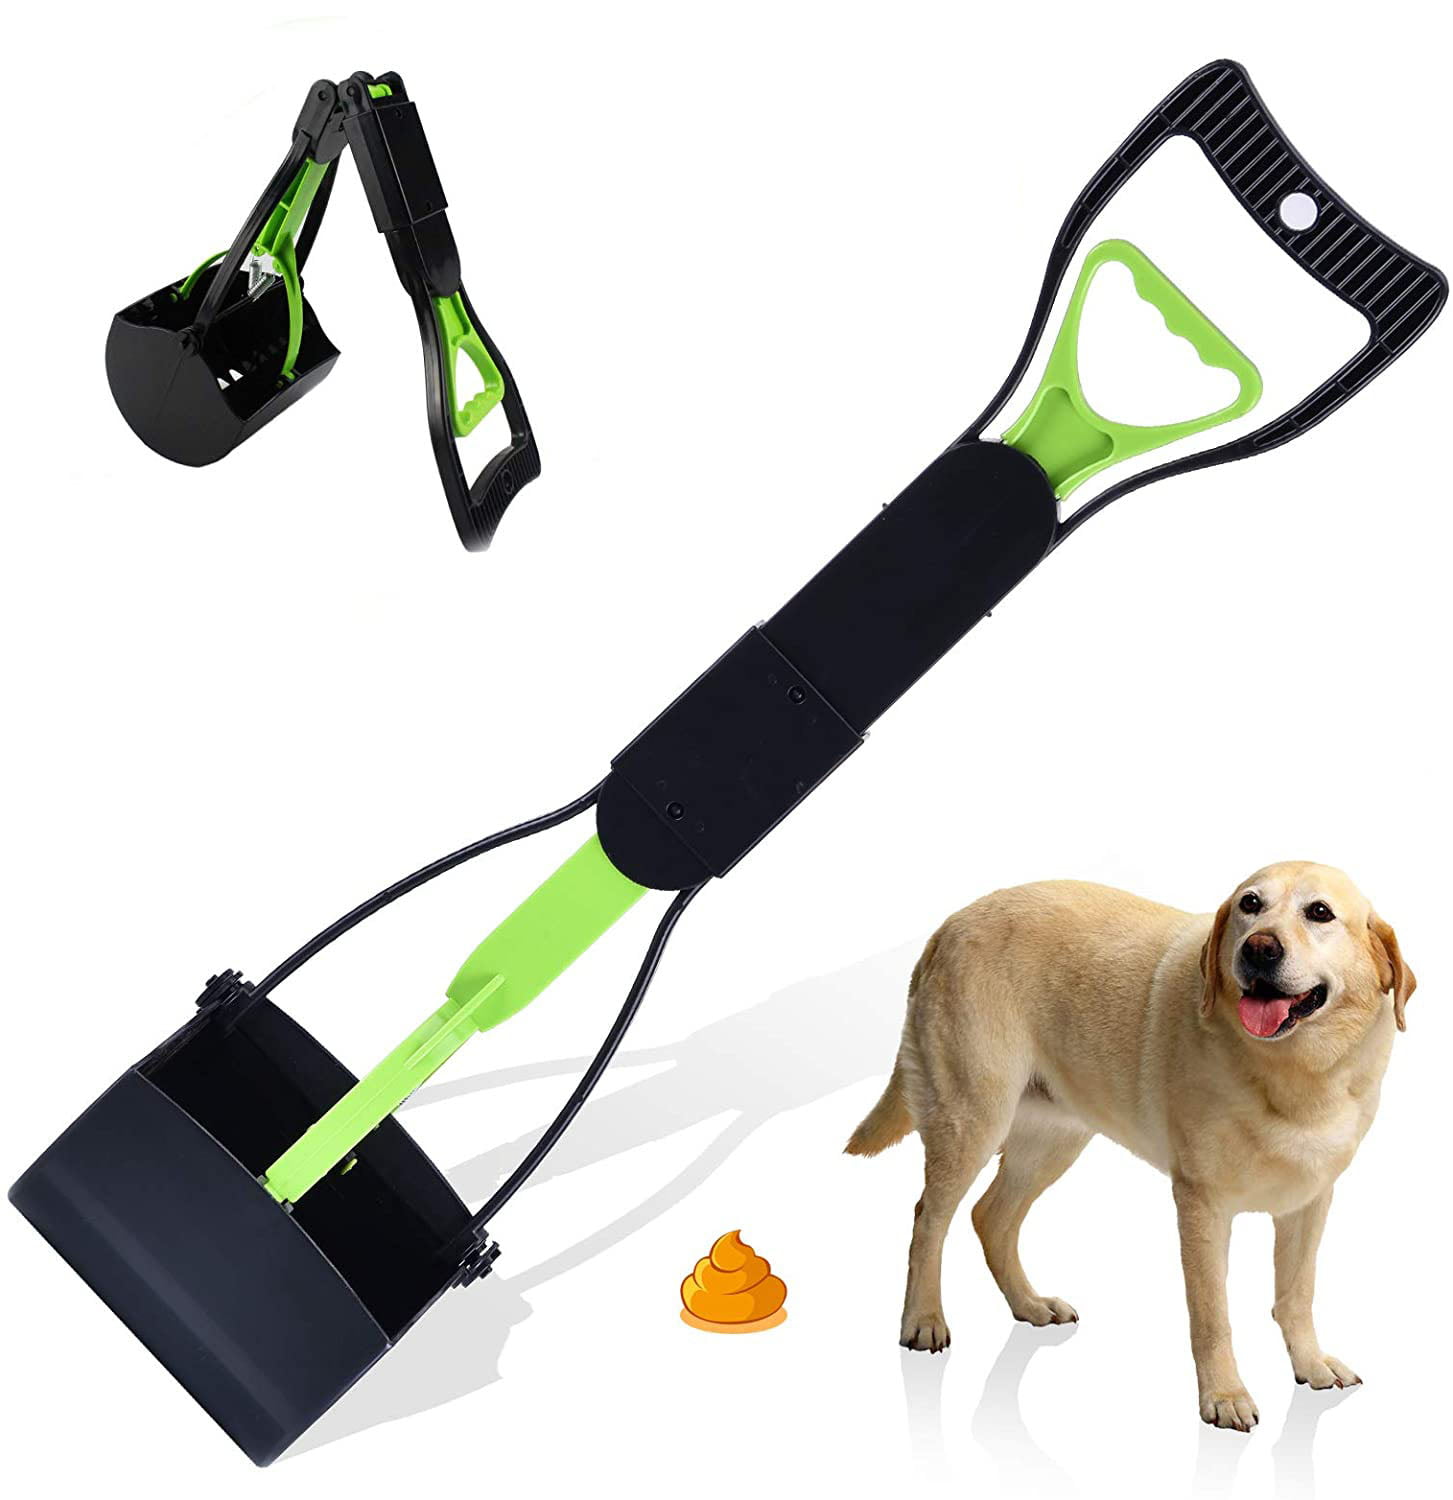 Green+black Poop Scoop Lightweight Dog Poop Scooper Rugged Adjustable with Springs Metal Tray for Easy Grass and Gravel Pick Up for Pet Waste Pick Up